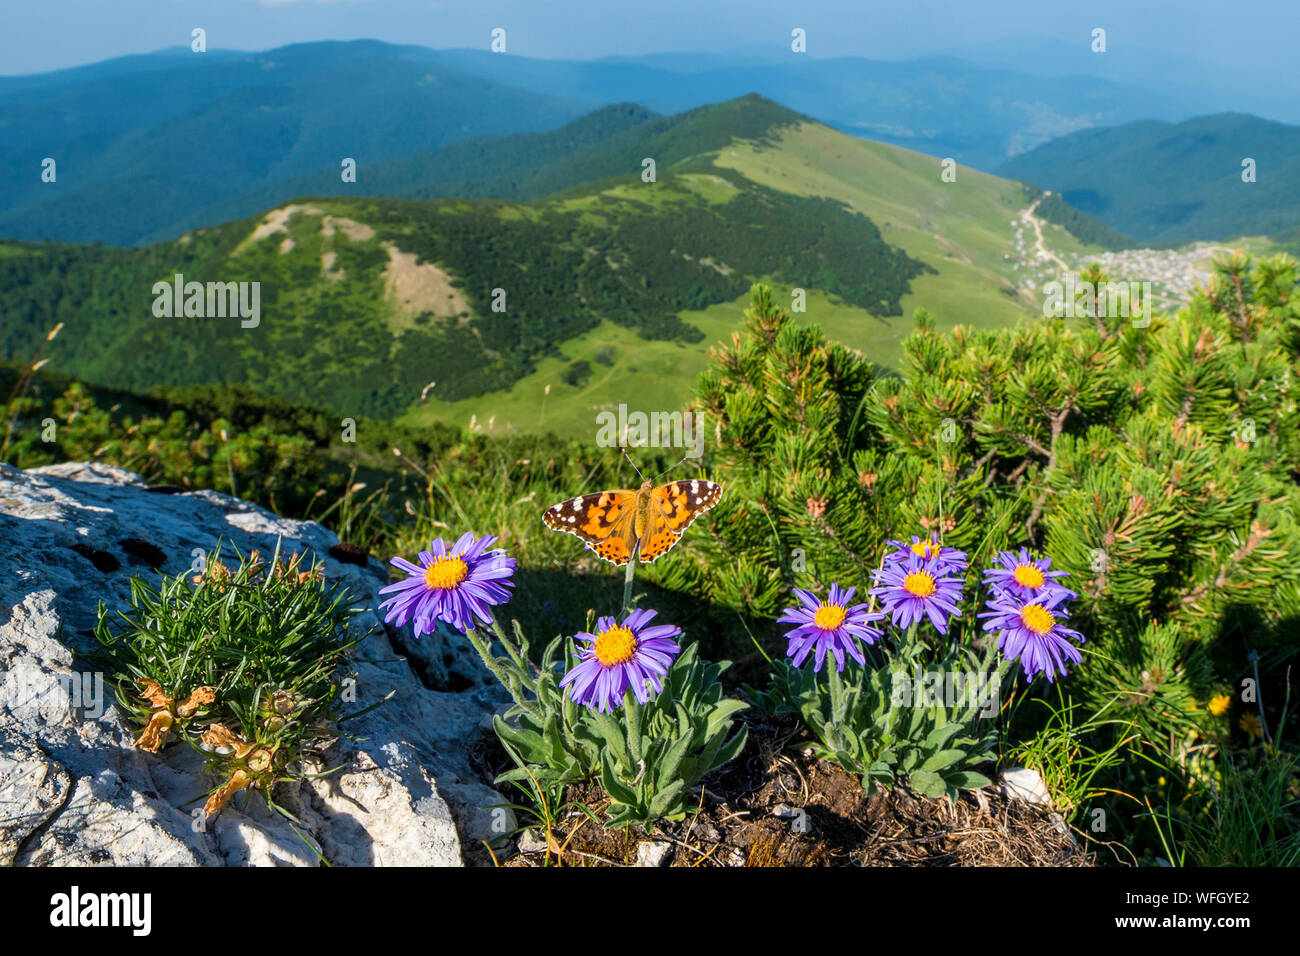 Butterfly on Alpine aster flowers, Krstac mountain, Bosnia and Herzegovina Stock Photo